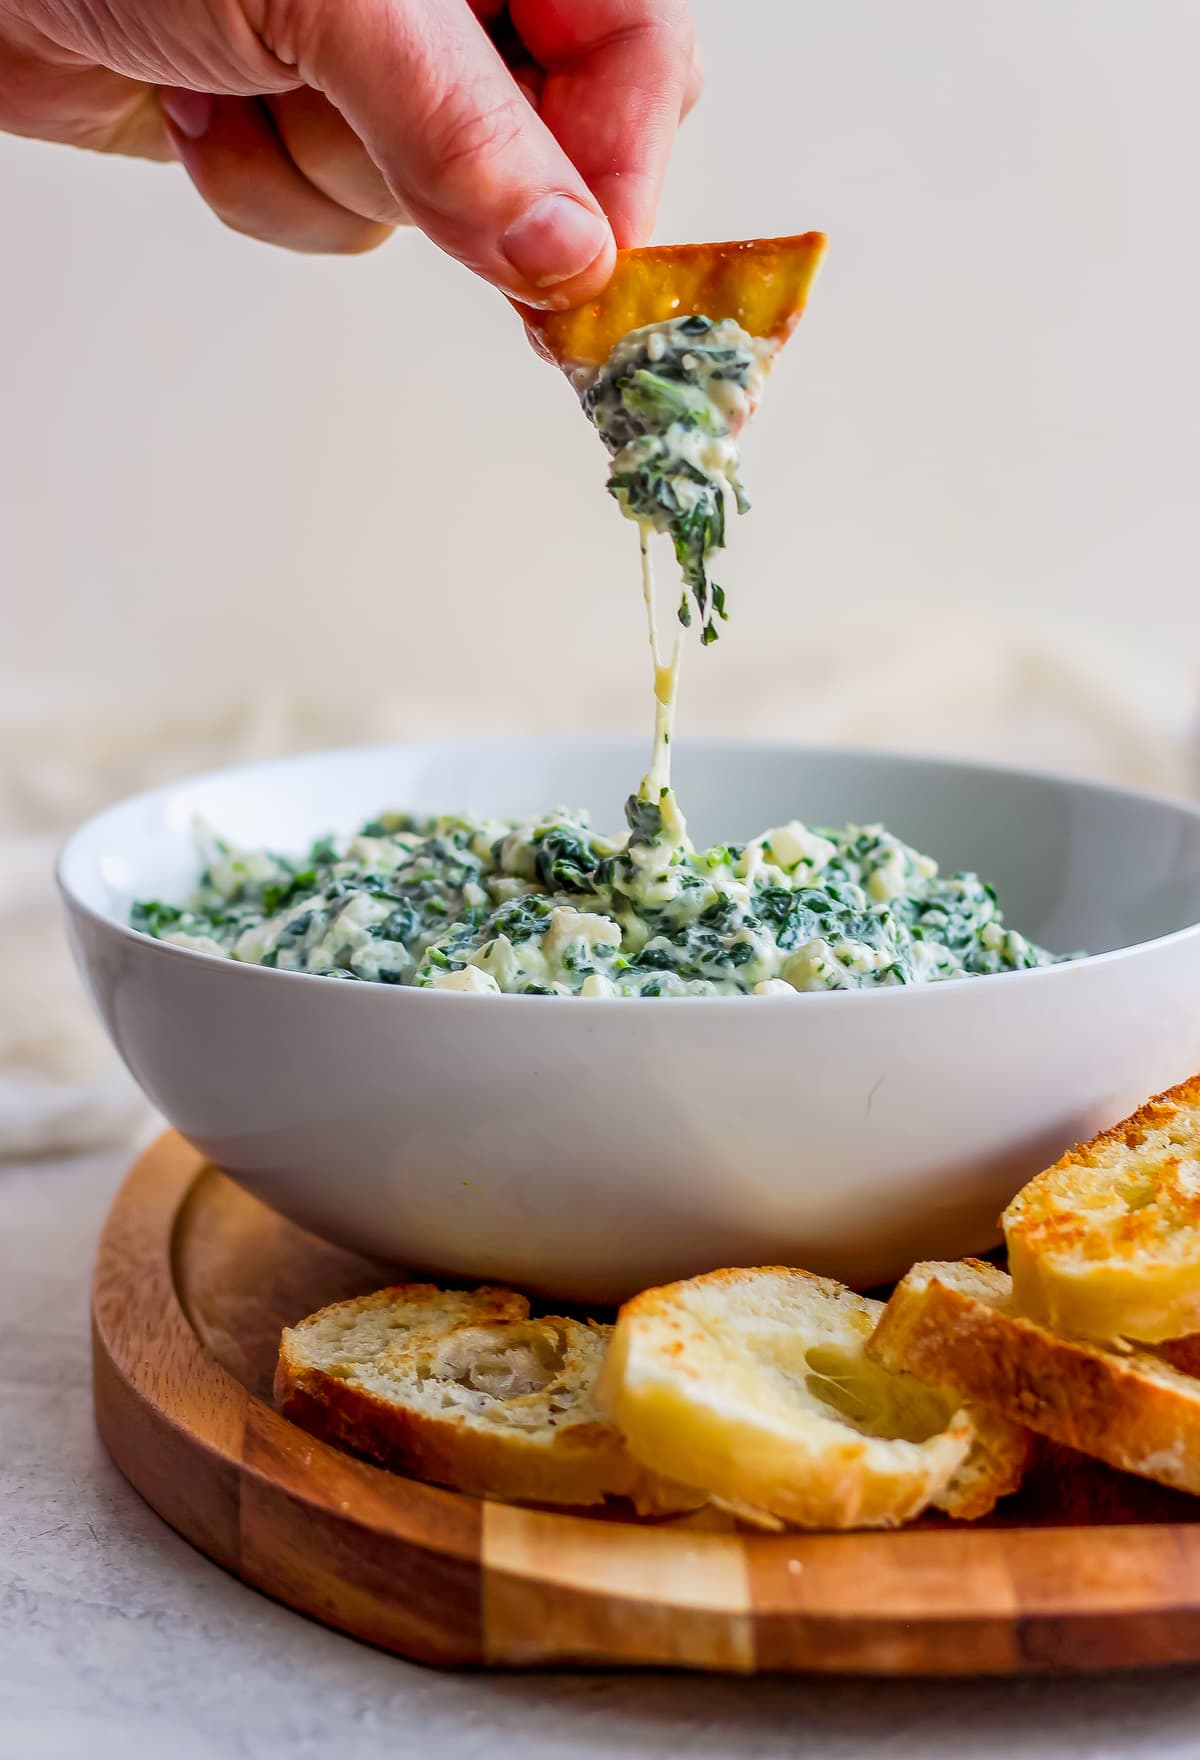 Crockpot Skinny Parmesan Spinach Dip is a delicious and healthy(er) way to enjoy your next tailgate! The perfect appetizer! So fun to not have to feel bad about this classic recipe!